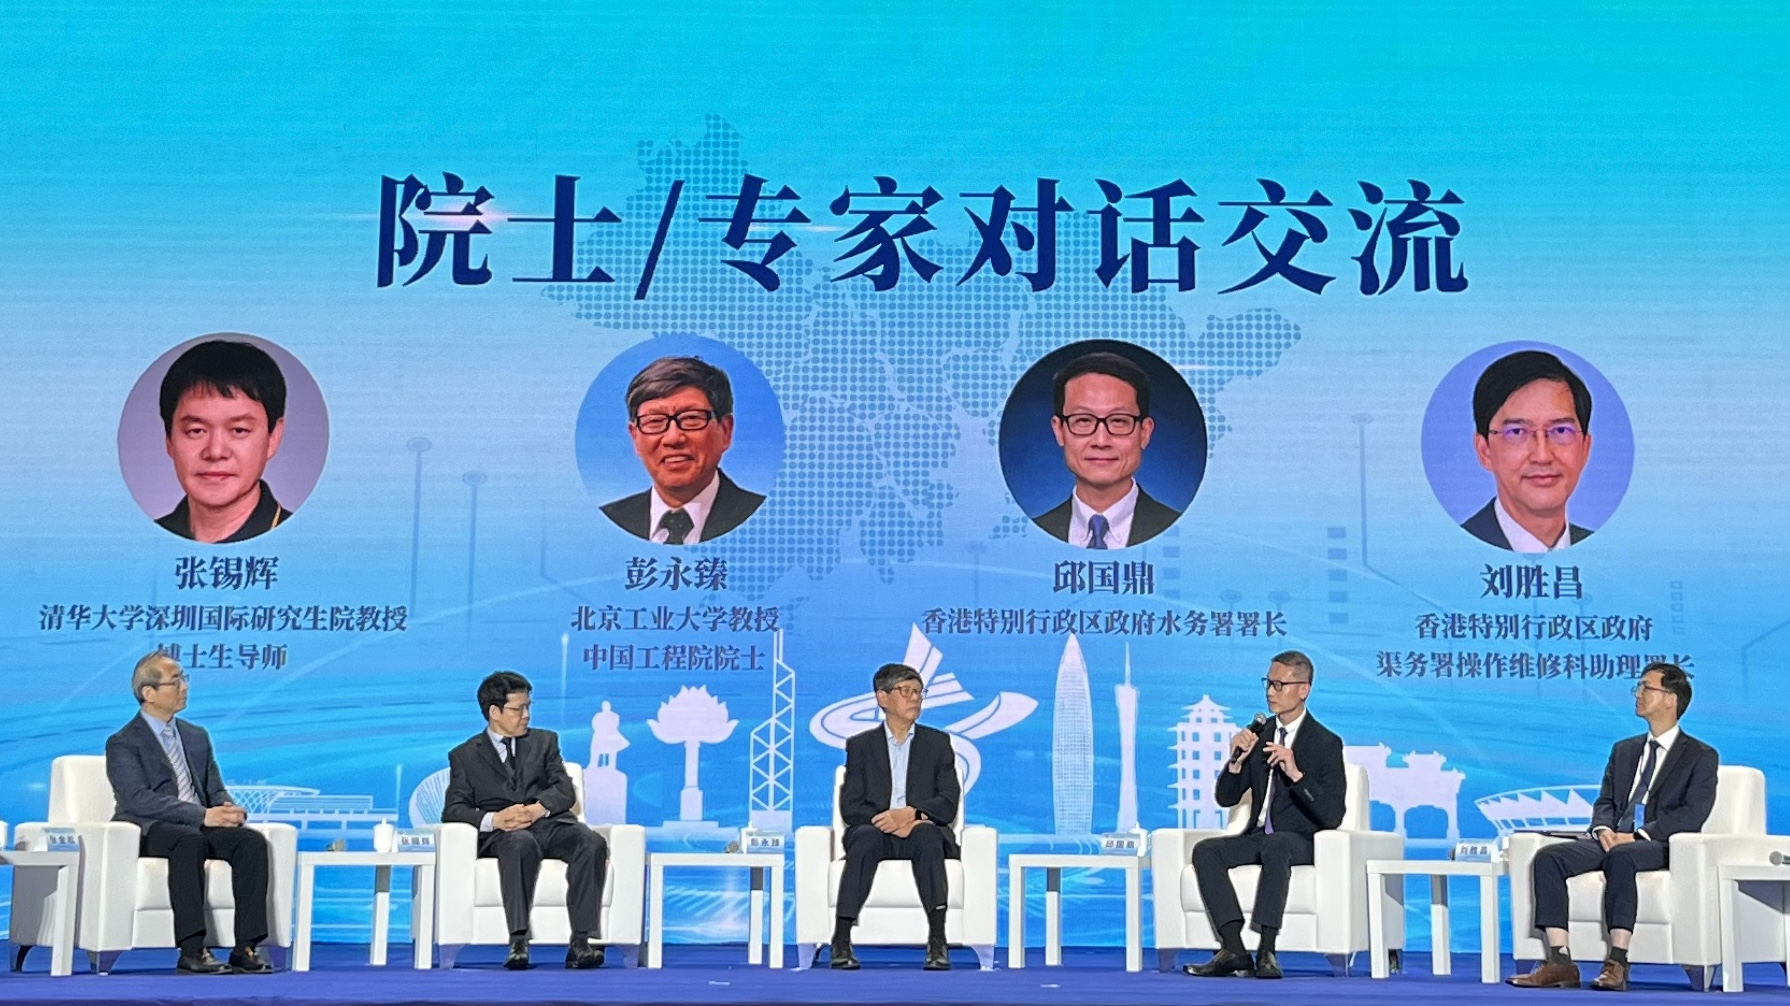 The Director of Water Supplies, Mr Tony Yau, attended the 5th Guangdong-Hong Kong-Macao Greater Bay Area Water Forum in Dongguan from November 8 to 10. Photo shows Mr Yau (second right) taking part in a dialogue session with experts and academicians yesterday (November 9). Assistant Director of the Drainage Services Department Mr Edwin Lau (first right) also participated in the session.